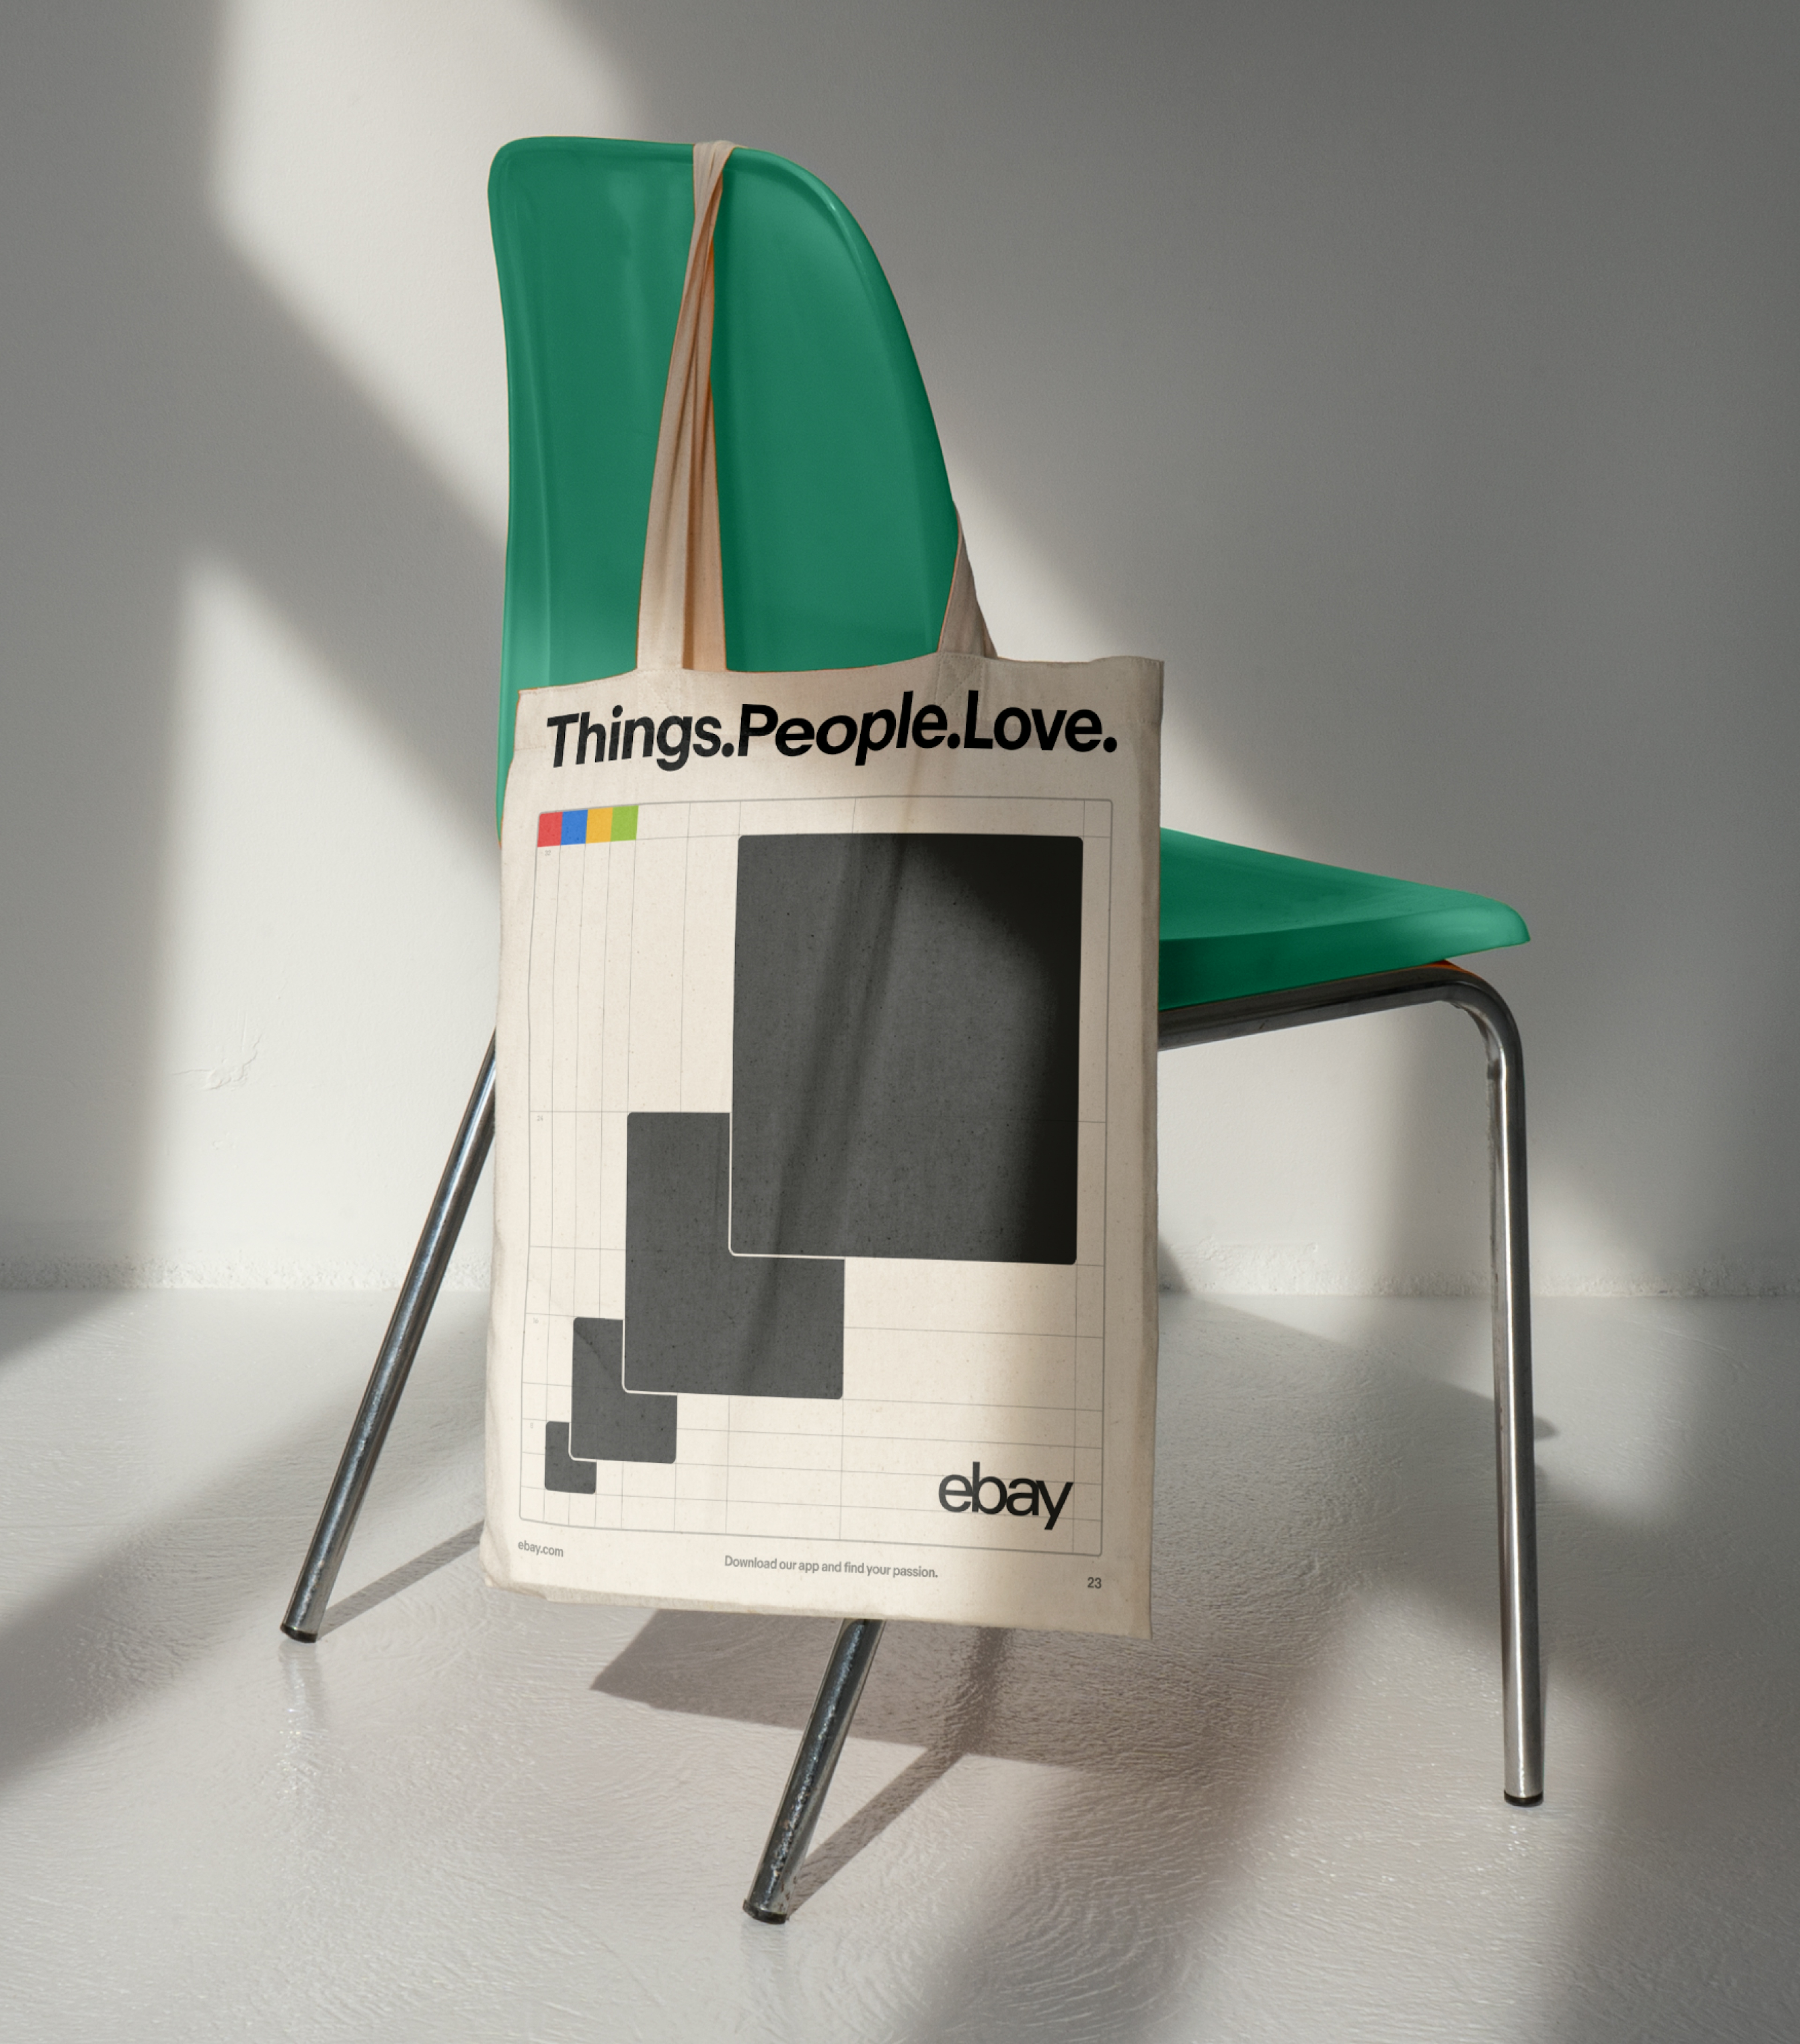 A graphic tote bag with "Things.People.Love" hanging over the back of a bright green chair.